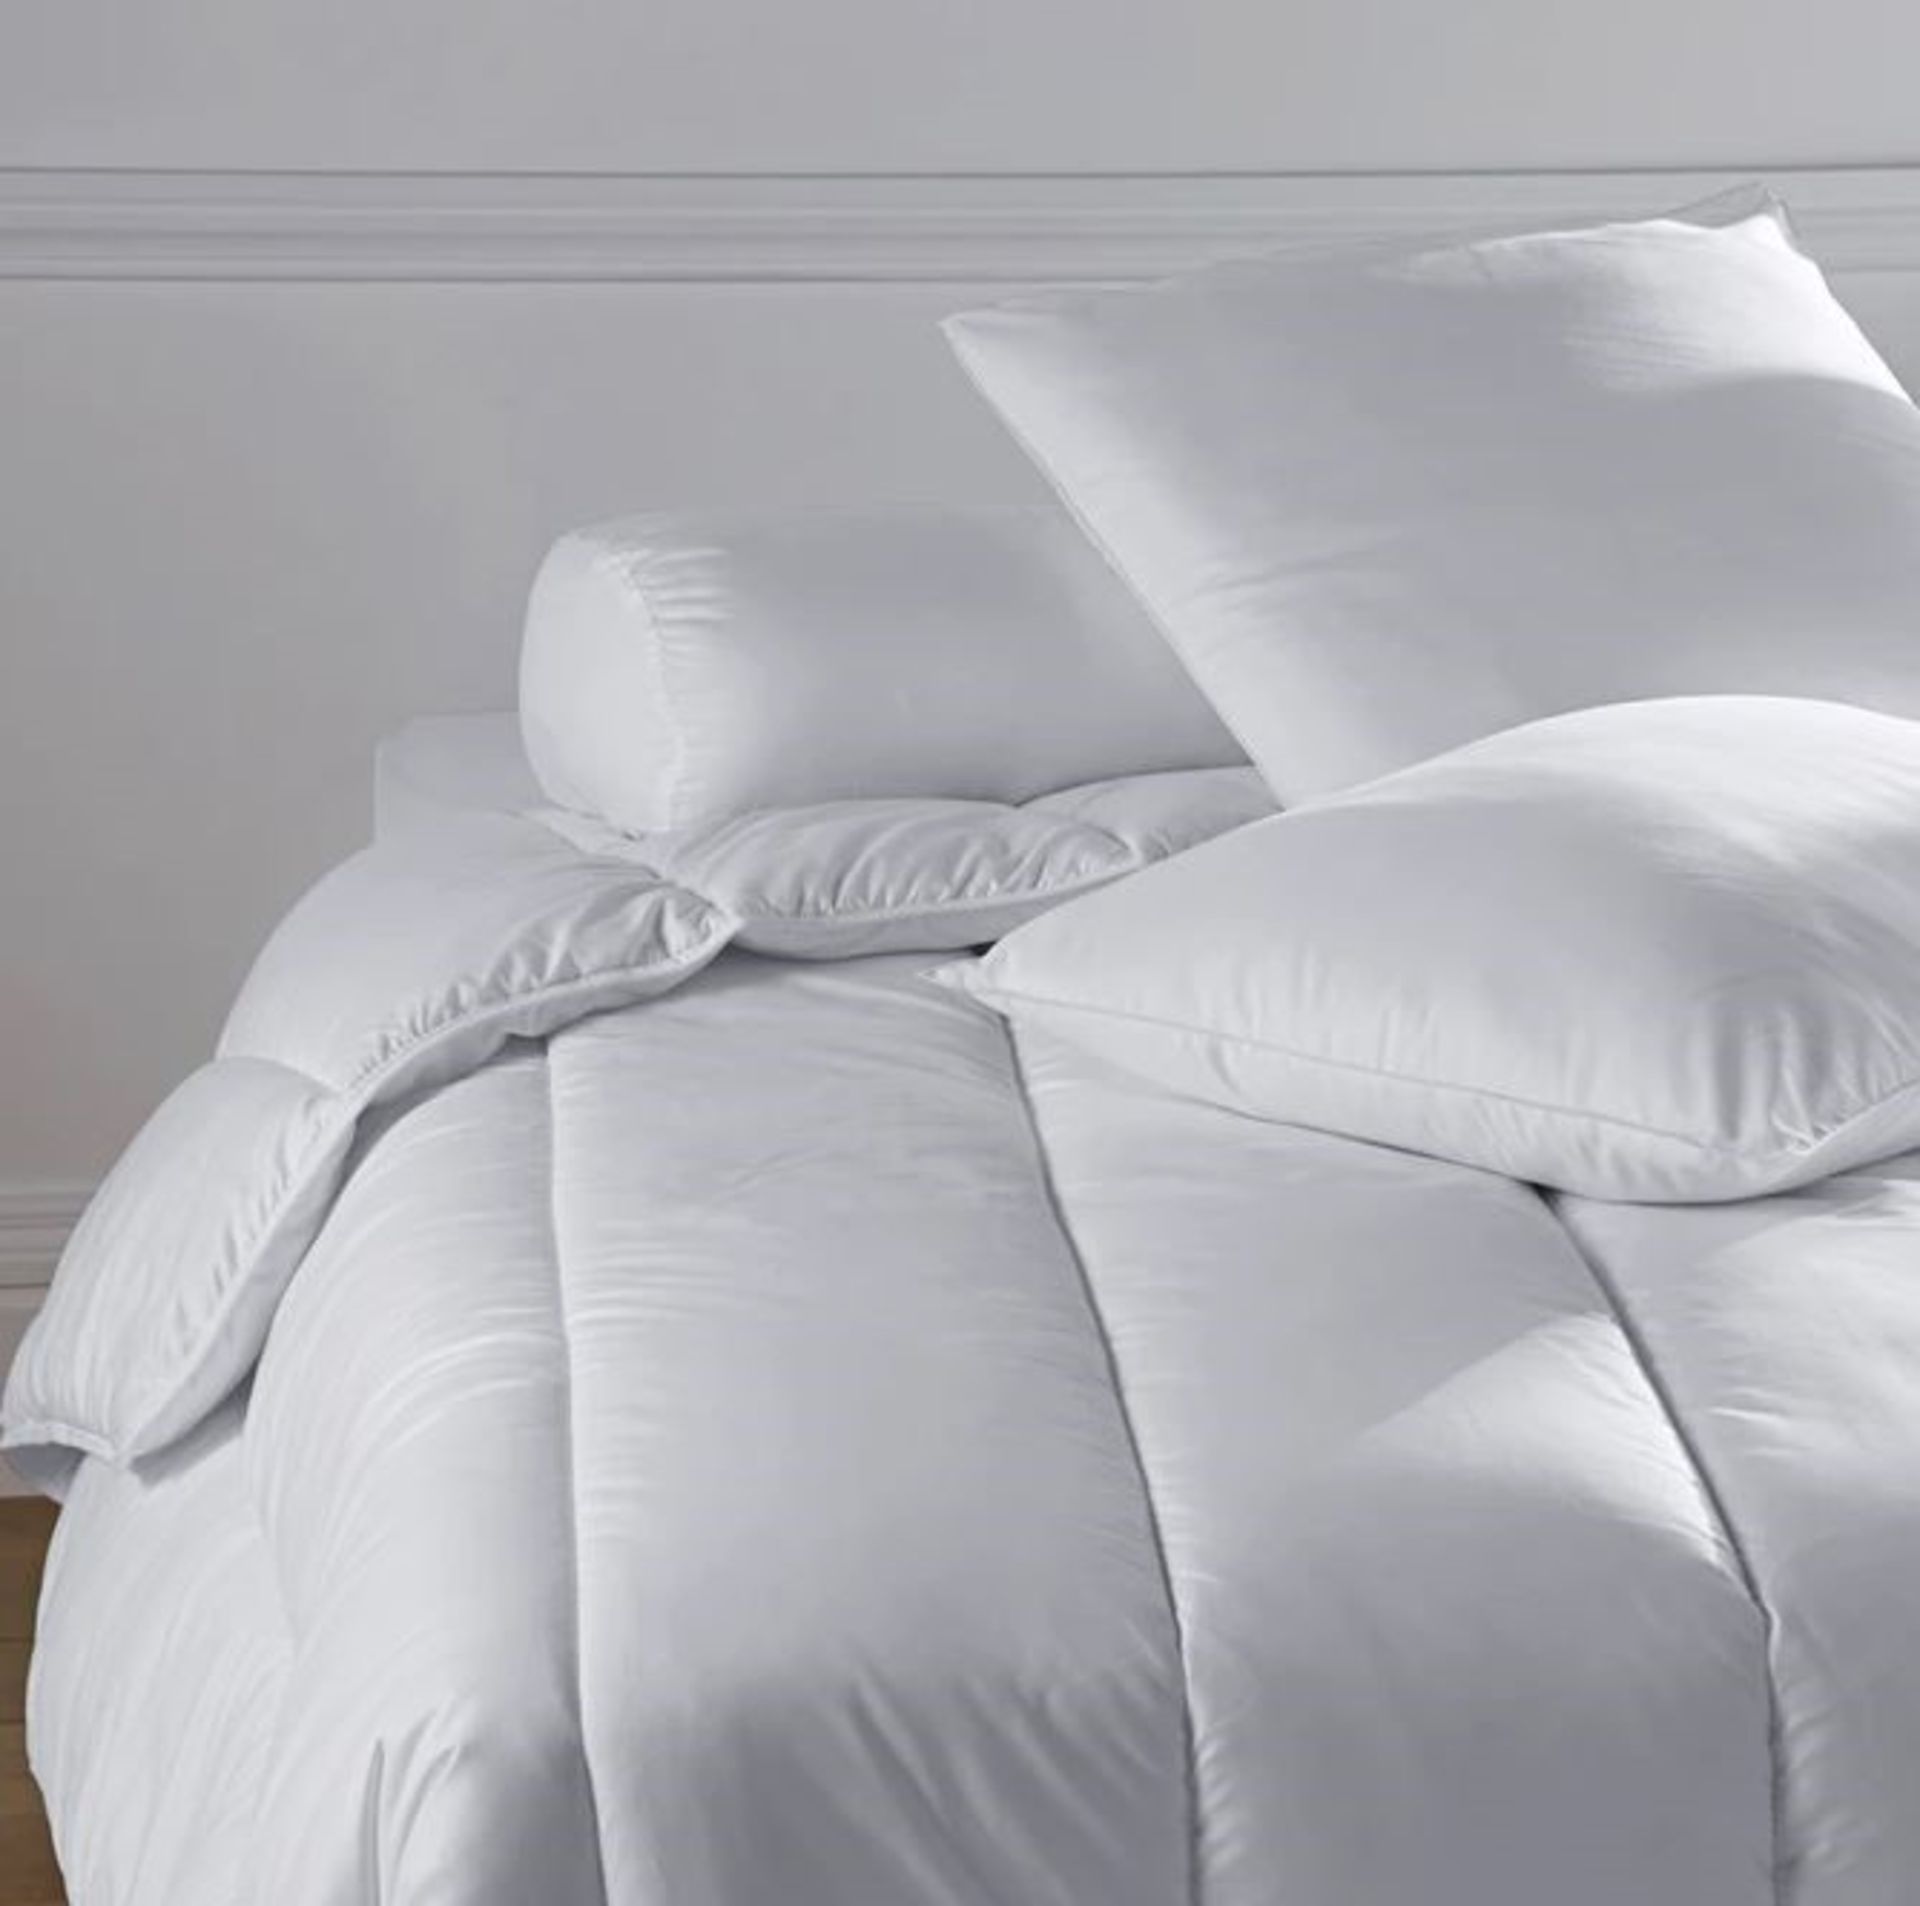 1 BAGGED GRADE A, BI-OME TREATED MID-WEIGHT POLYESTER DUVET IN WHITE / SIZE: KING 240 X 220CM /